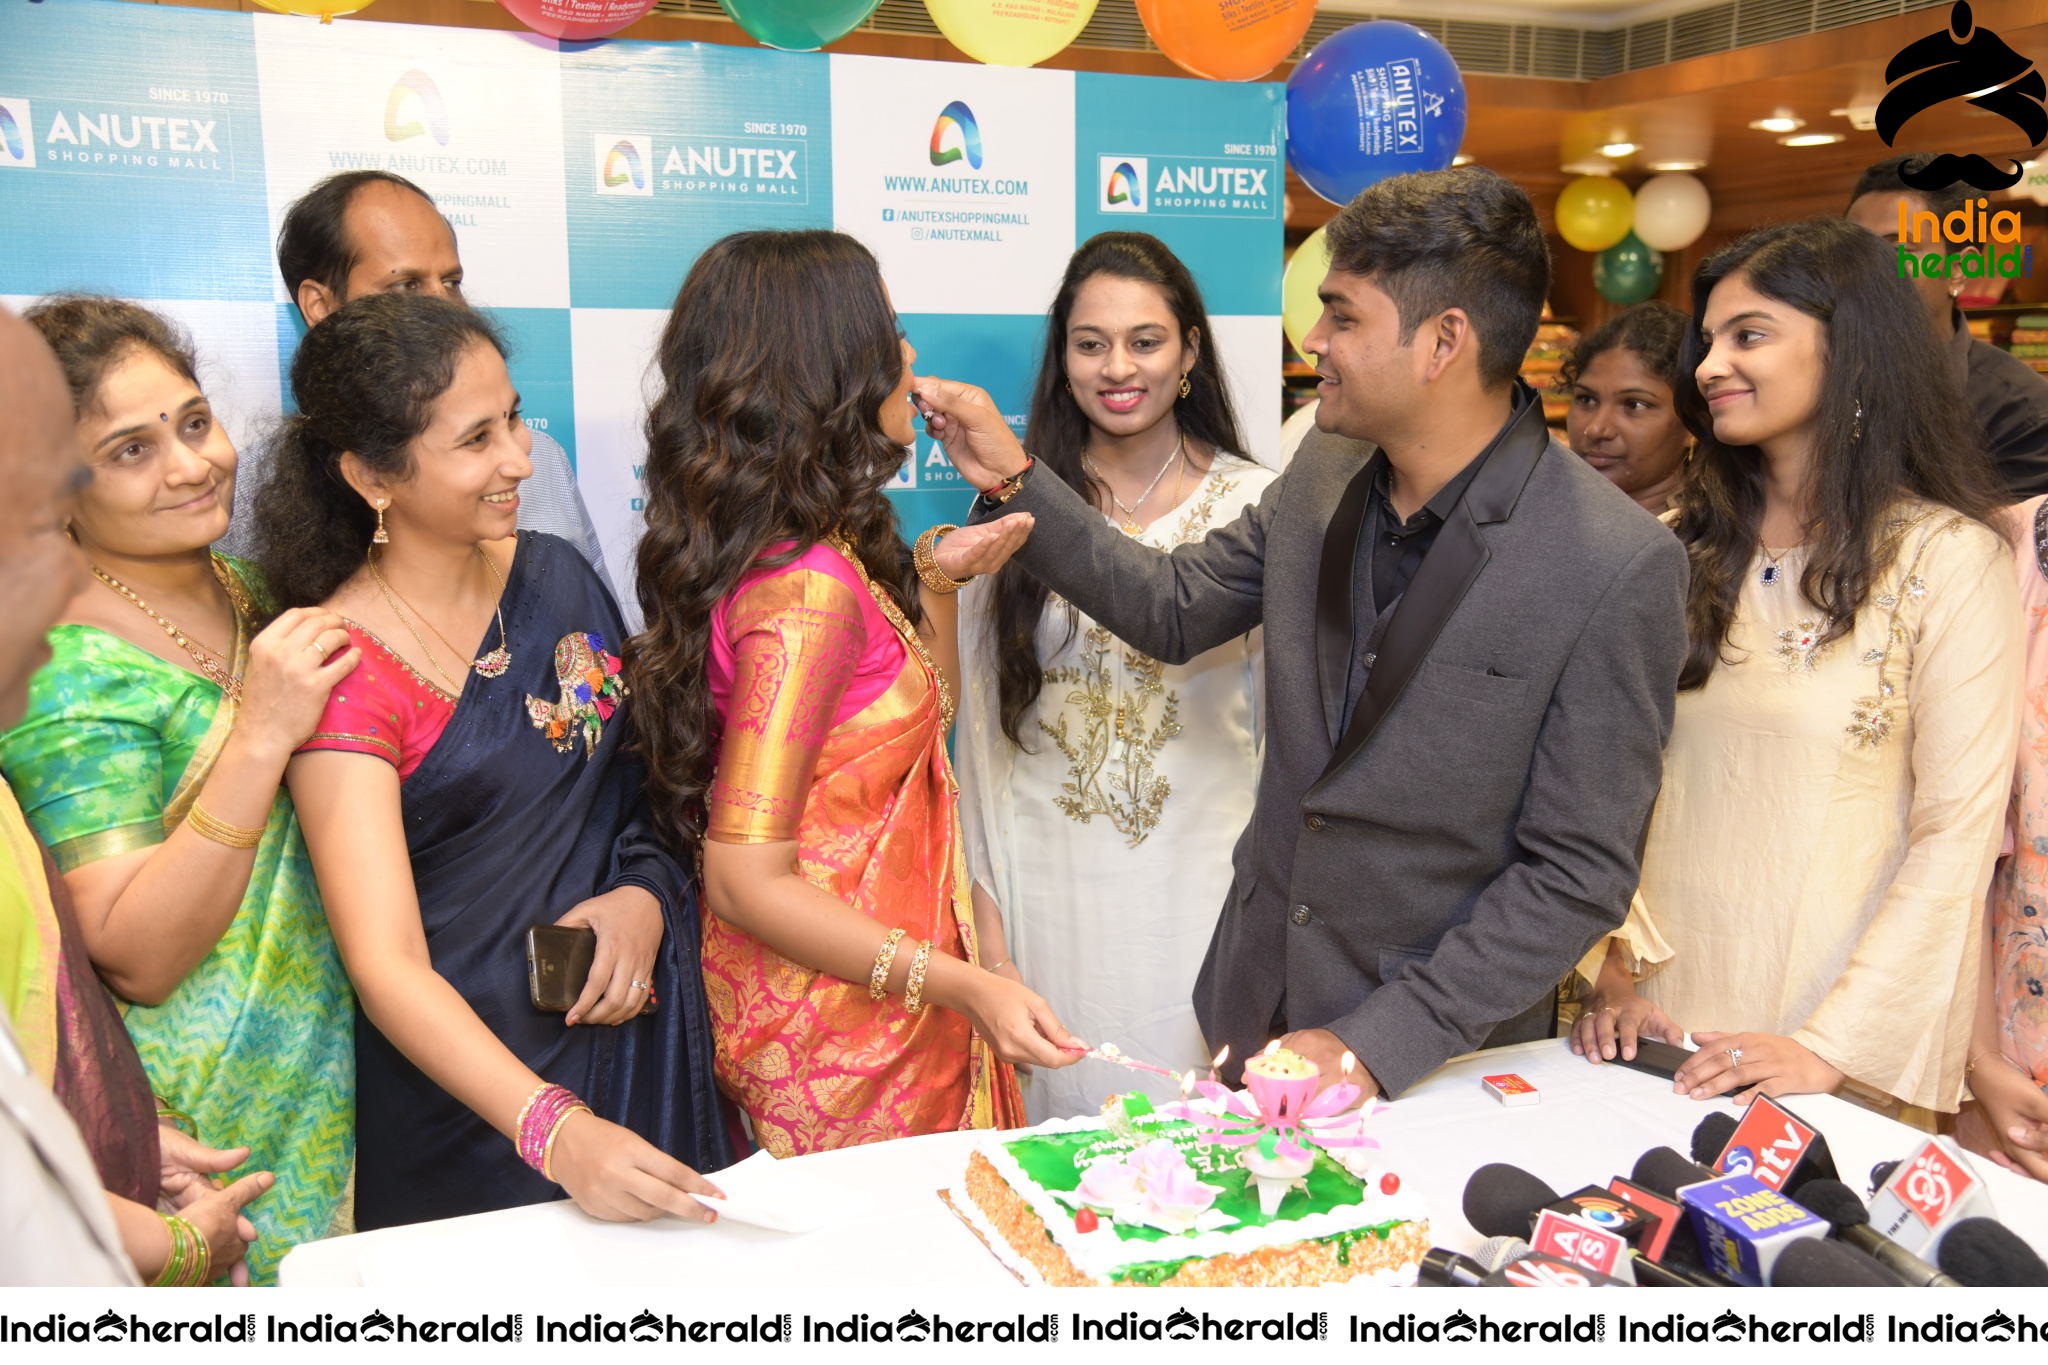 Anutex Shopping Mall Grand Festival Prizes And Collection Launched By Actress Anupama Parameswaran Set 3